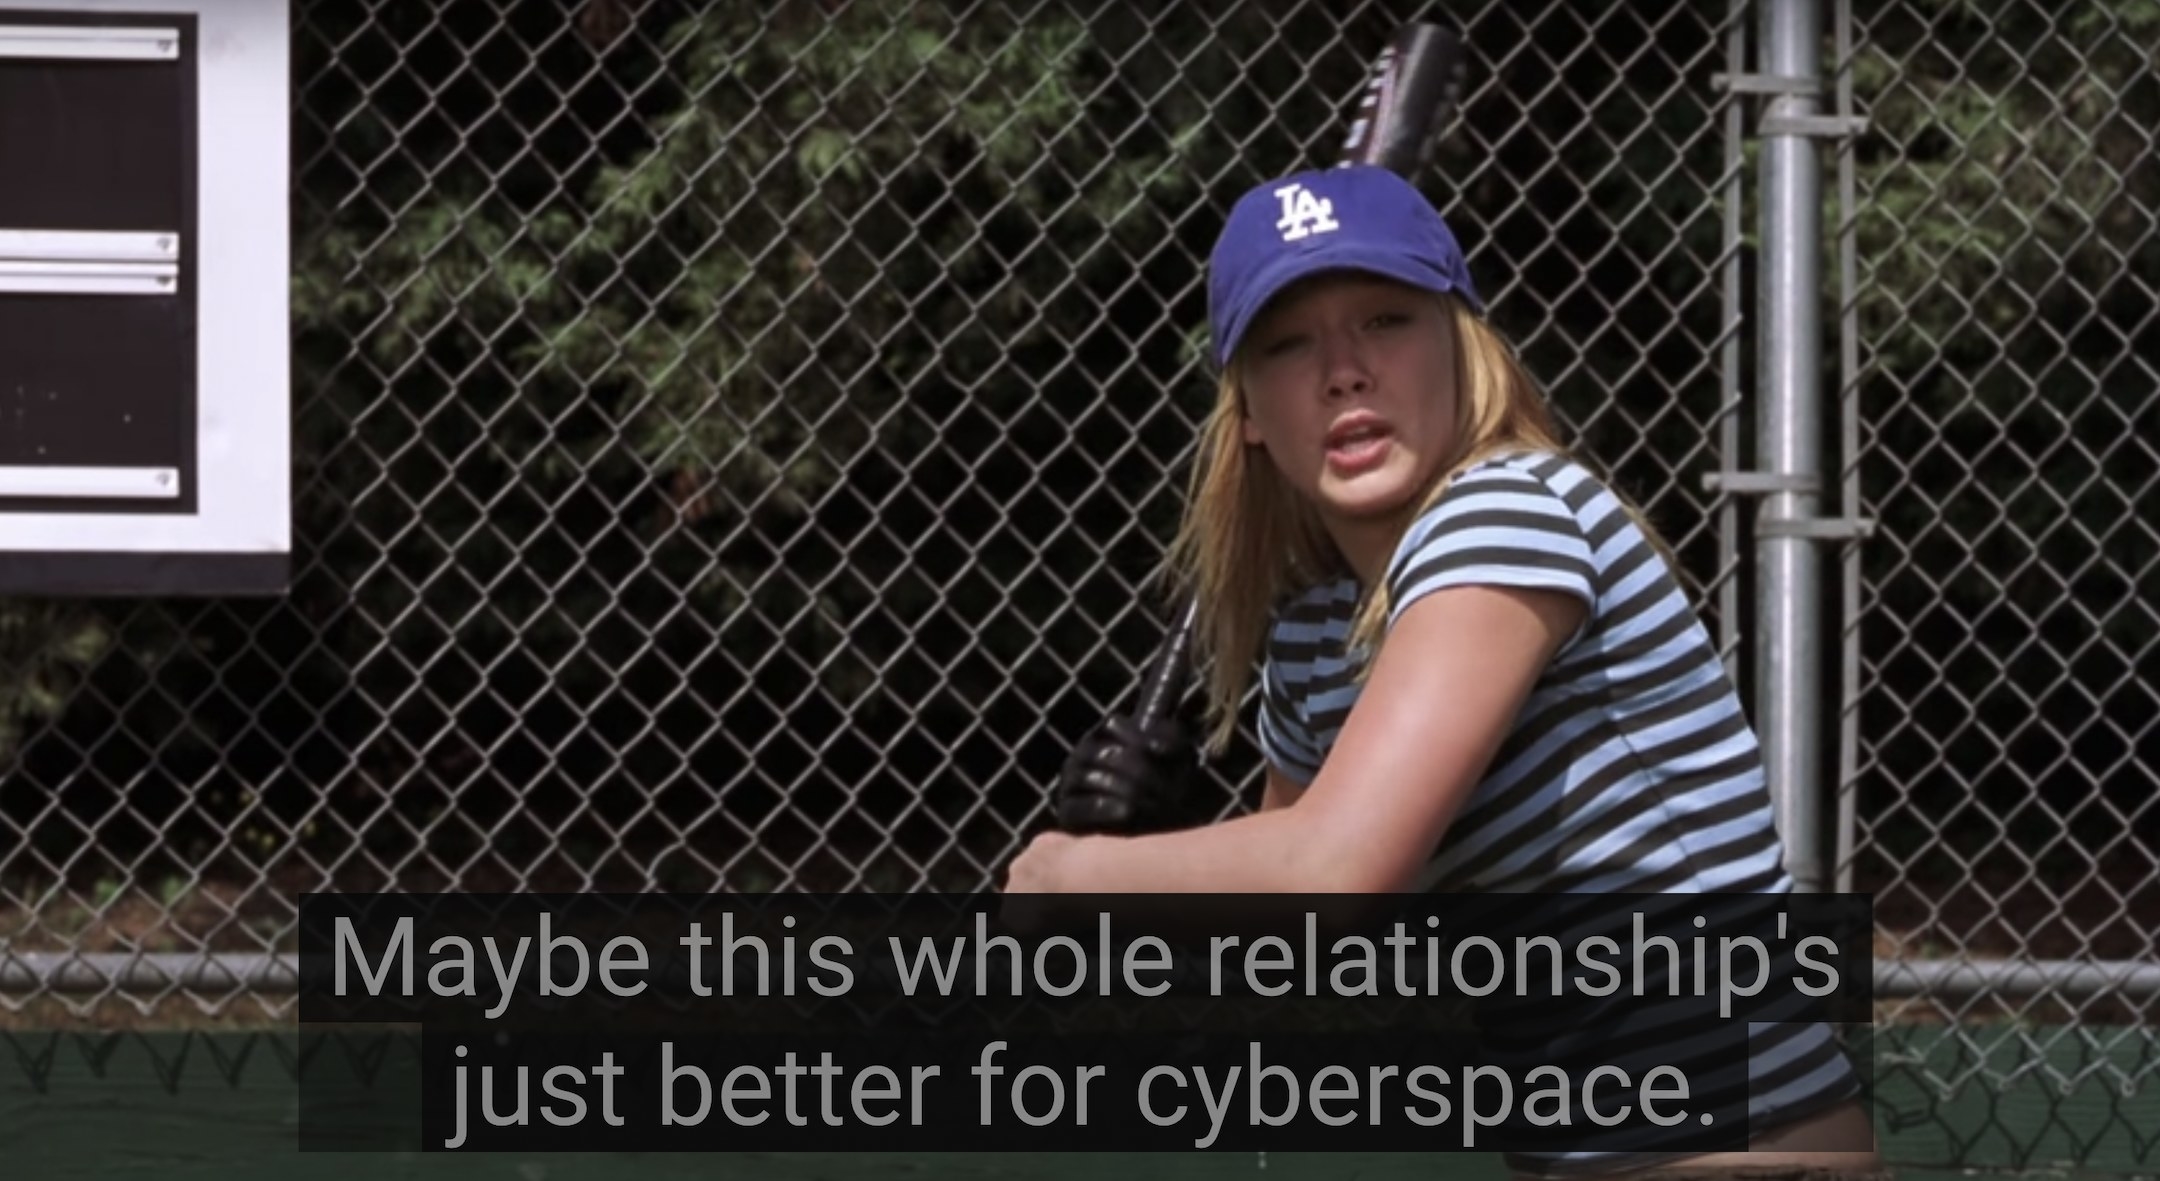 Sam says, Maybe this whole relationships just better for cyberspace